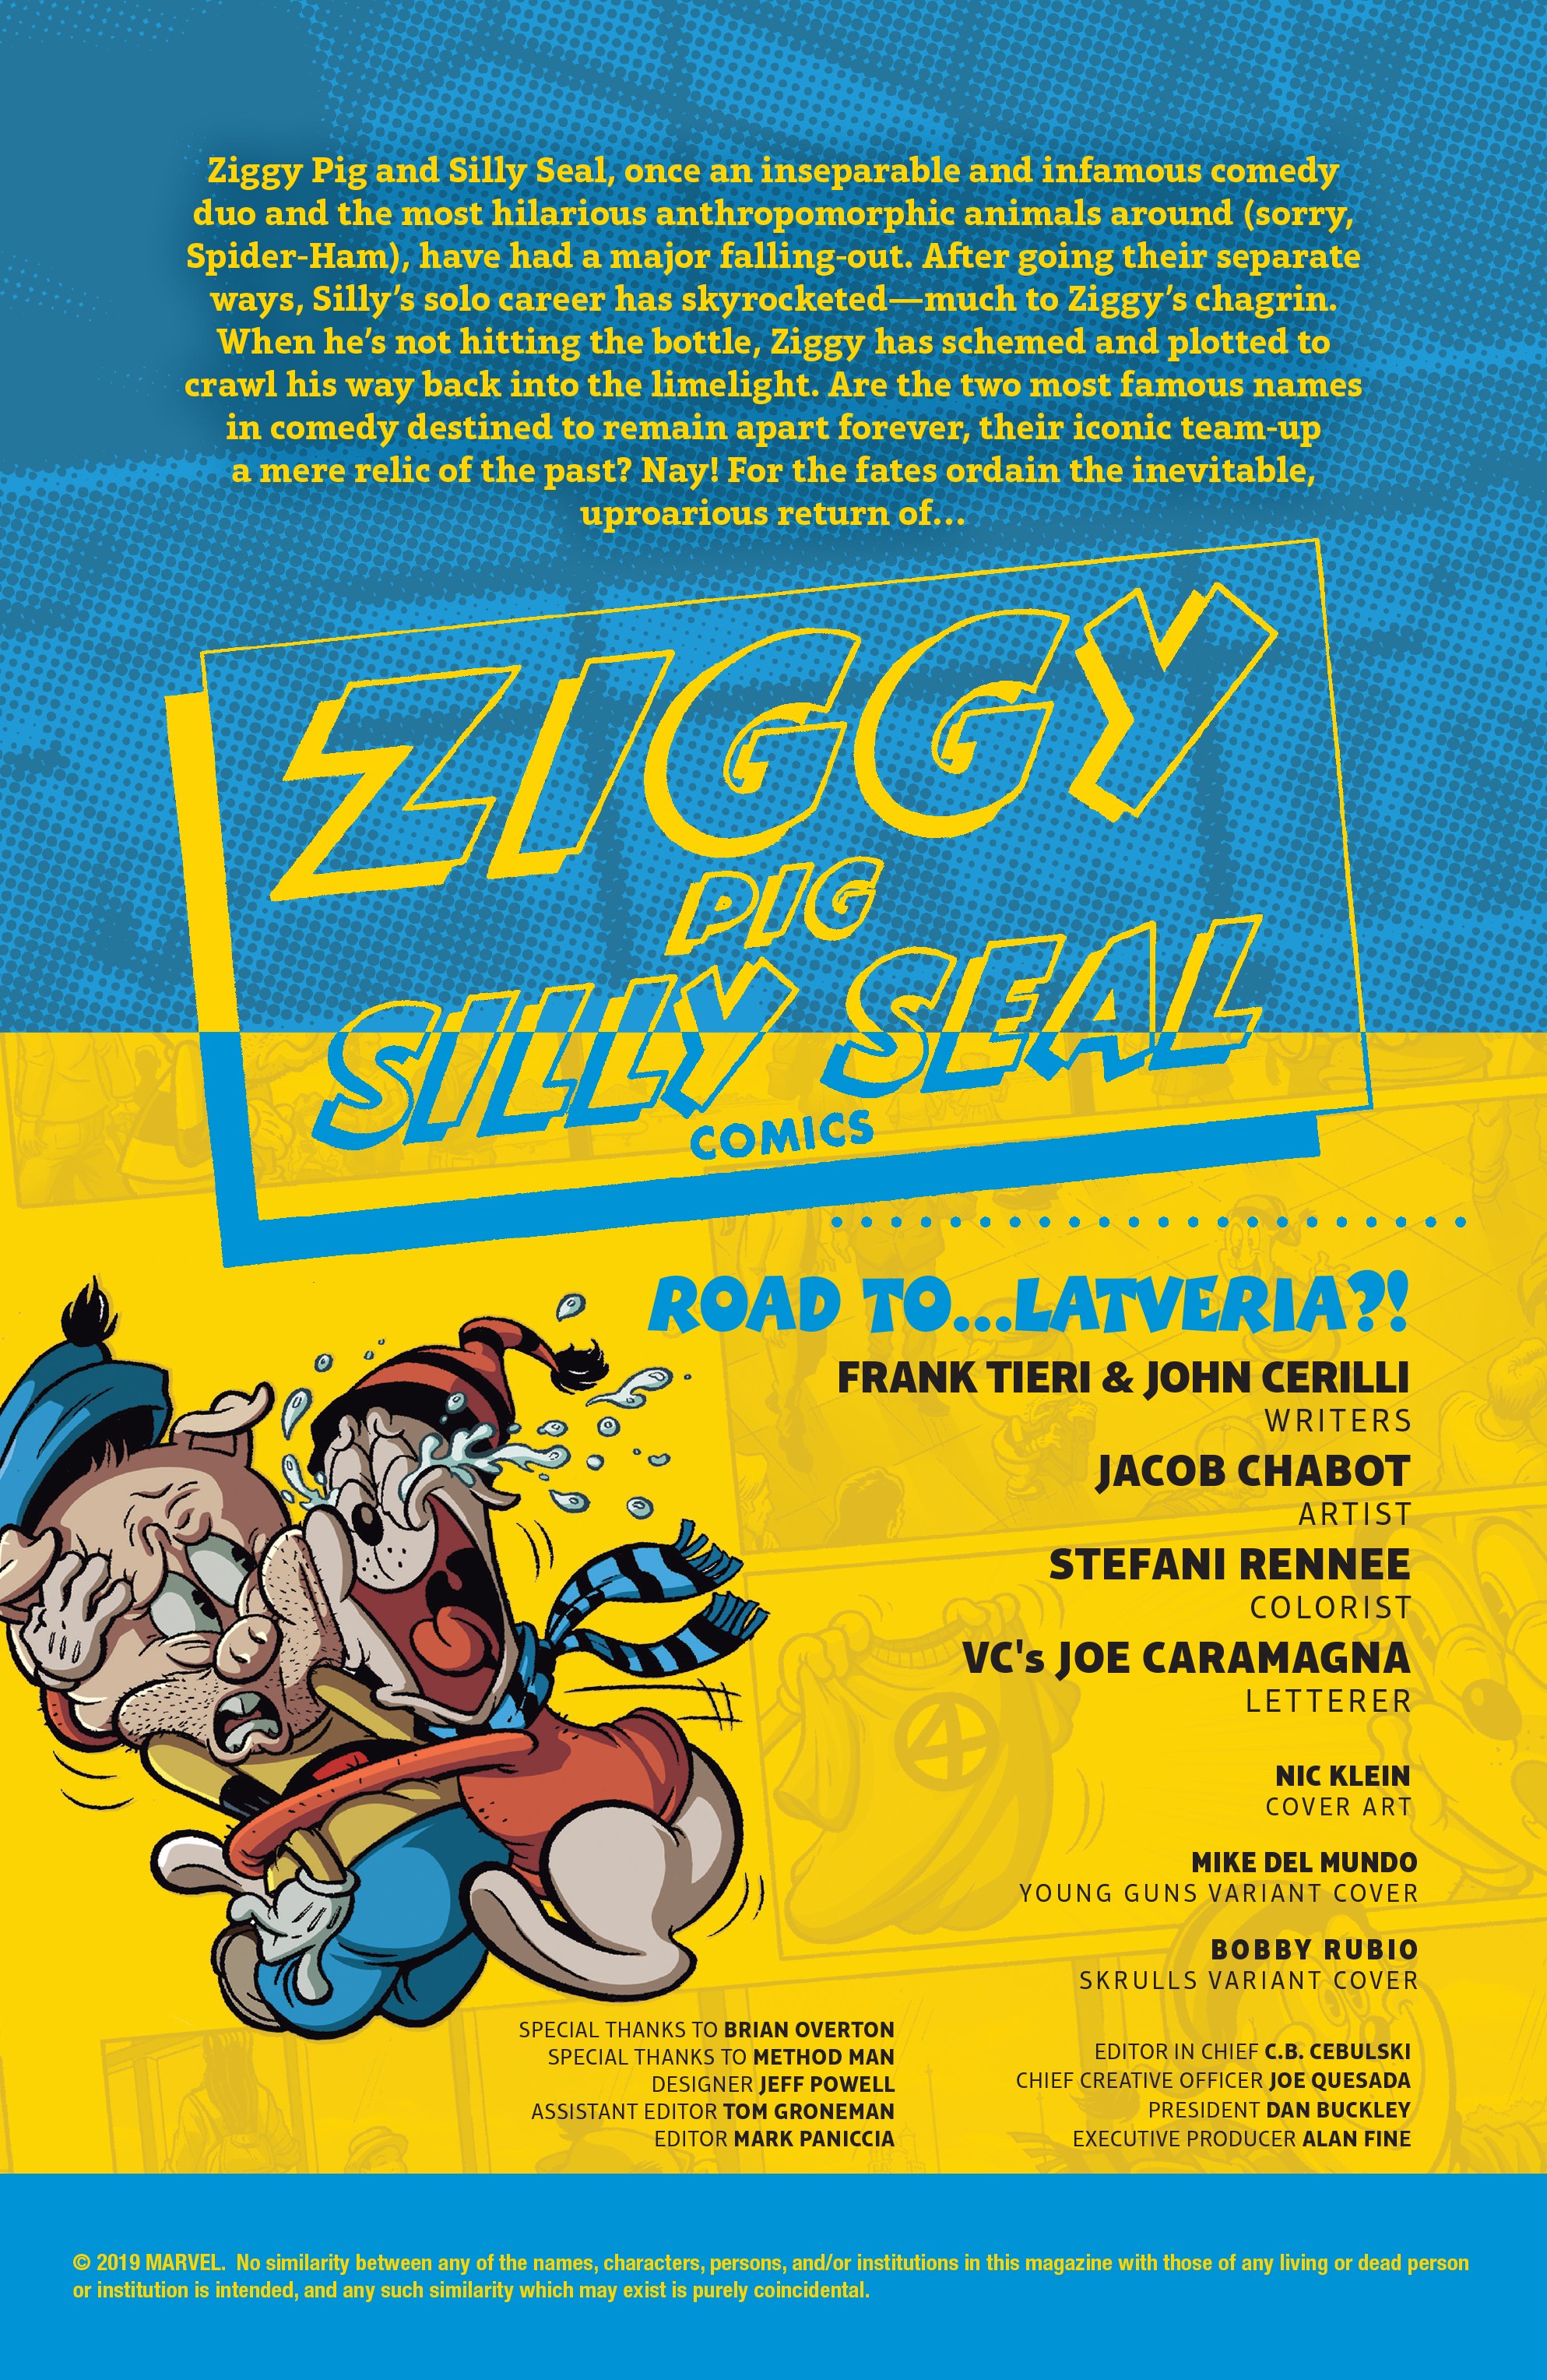 Read online Ziggy Pig - Silly Seal Comics comic -  Issue # Full - 2